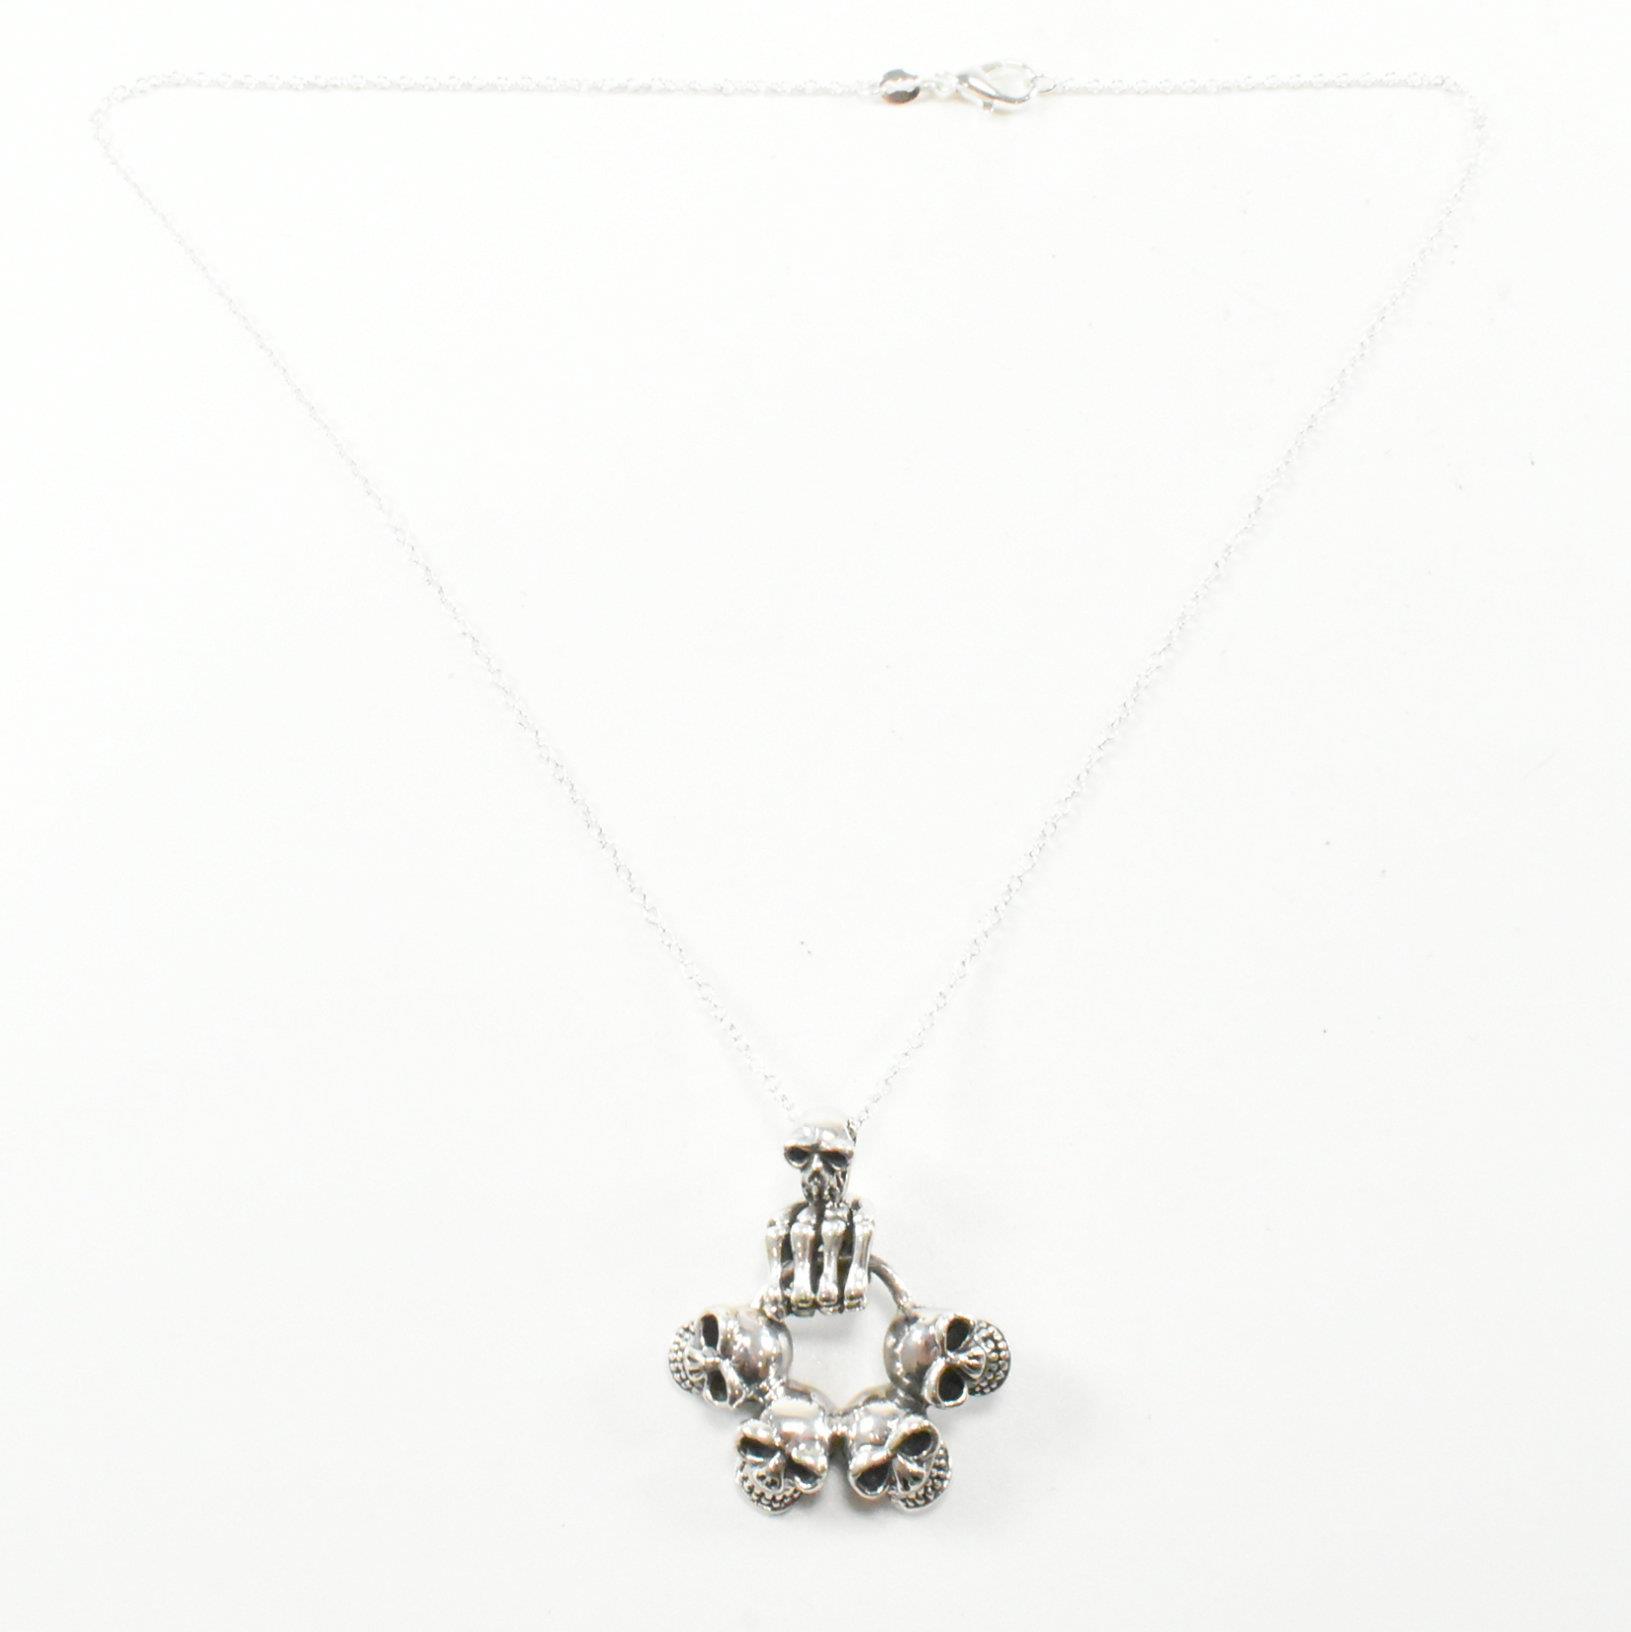 925 SILVER SKULL PENDANT NECKLACE - Image 5 of 5